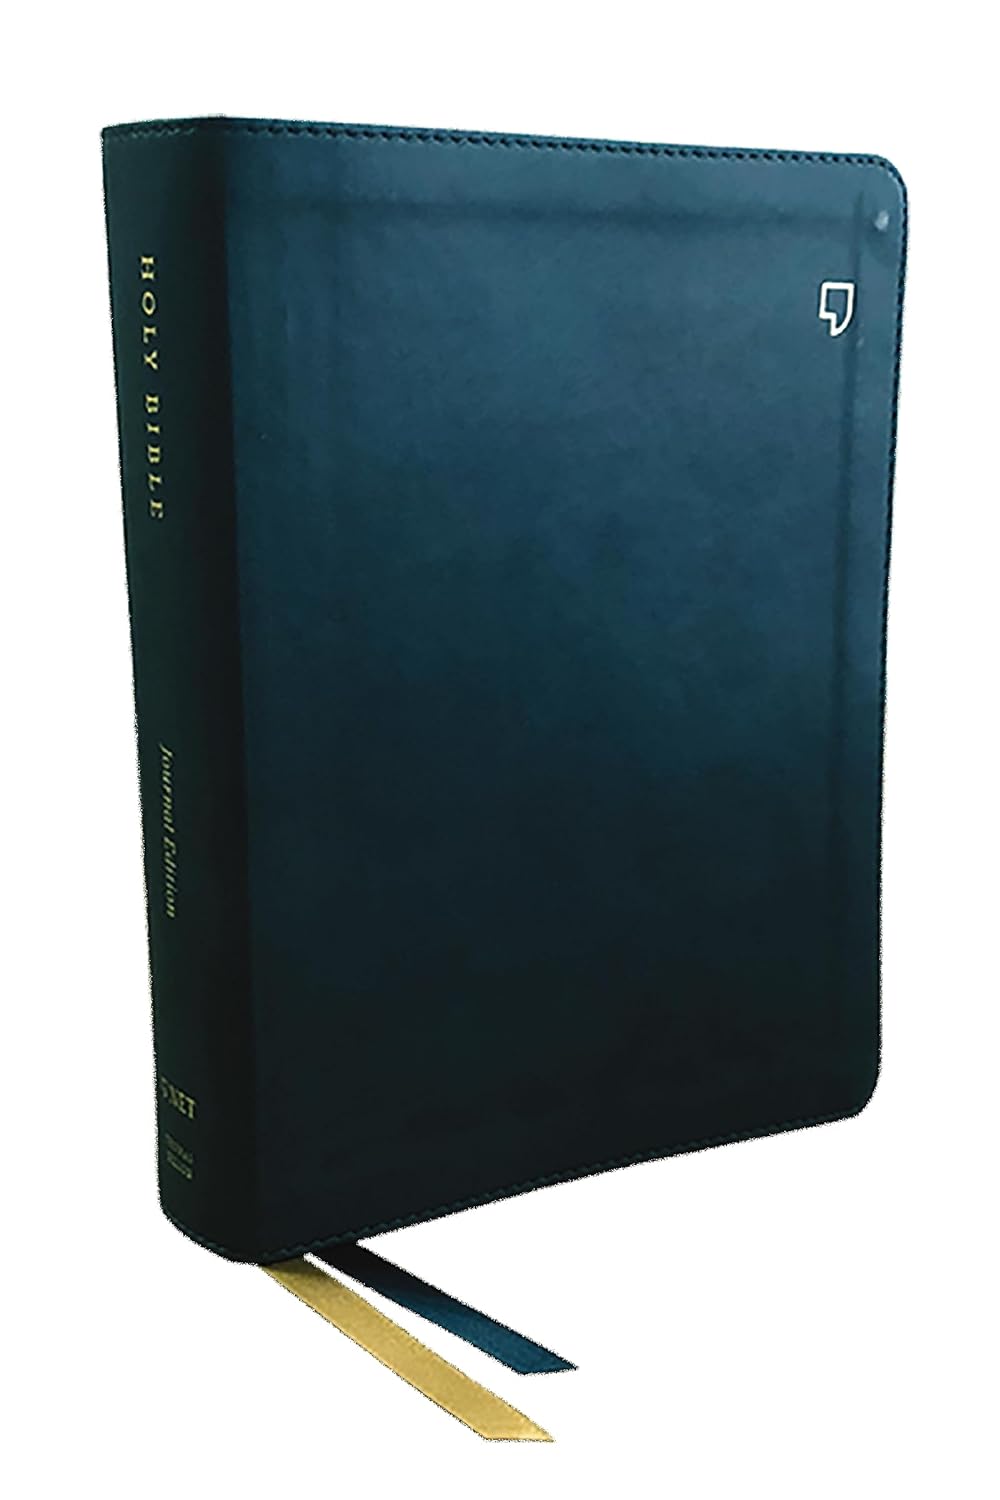 NET Bible, Journal Edition, Leathersoft, Comfort Print: Holy Bible Imitation Leather – Import,